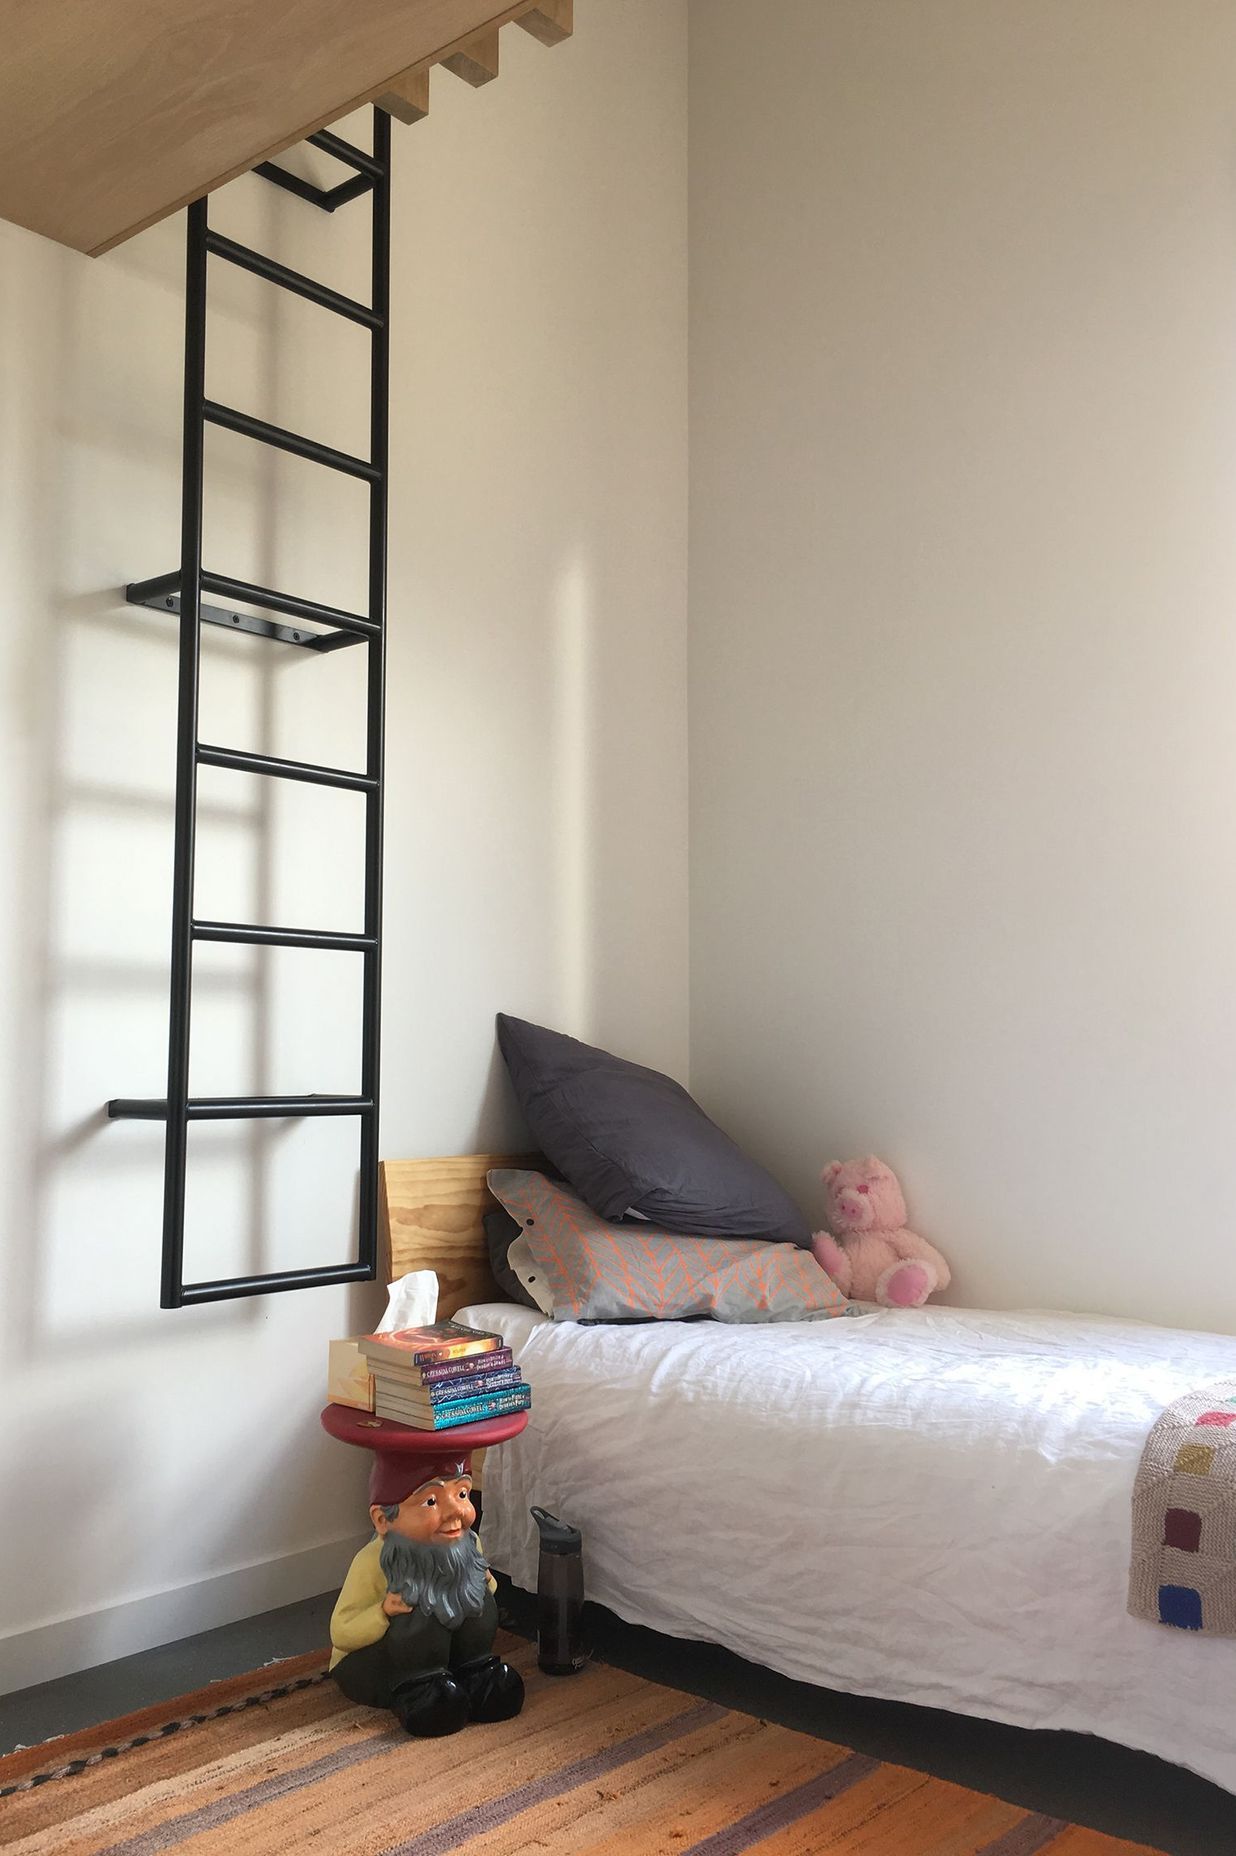 One of the children's bedrooms has a ladder to a mezzanine playspace.